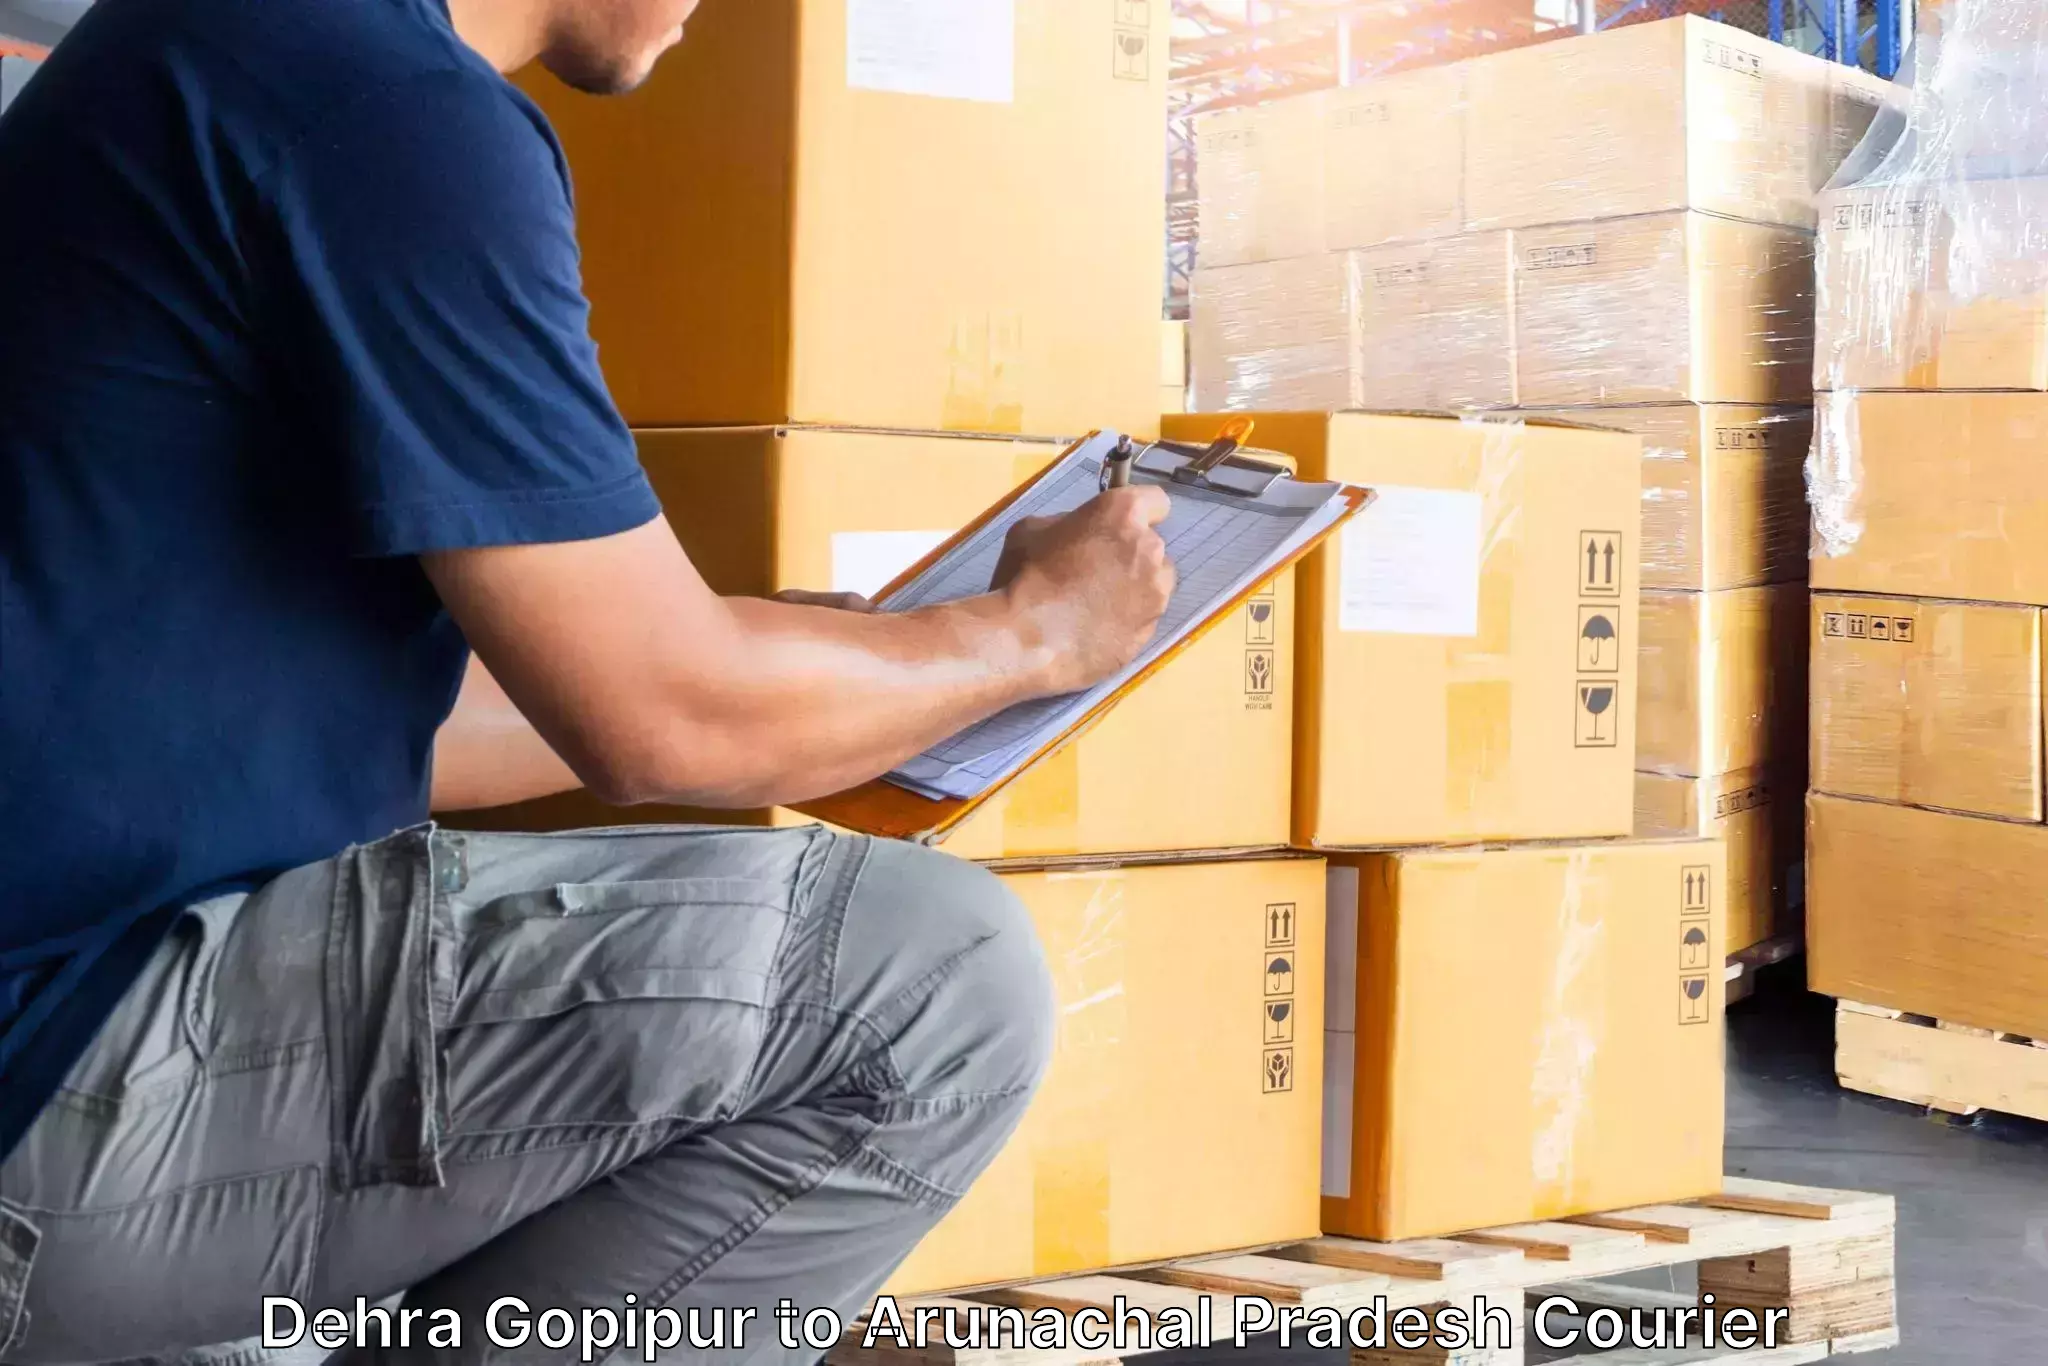 Specialized moving company Dehra Gopipur to Dirang